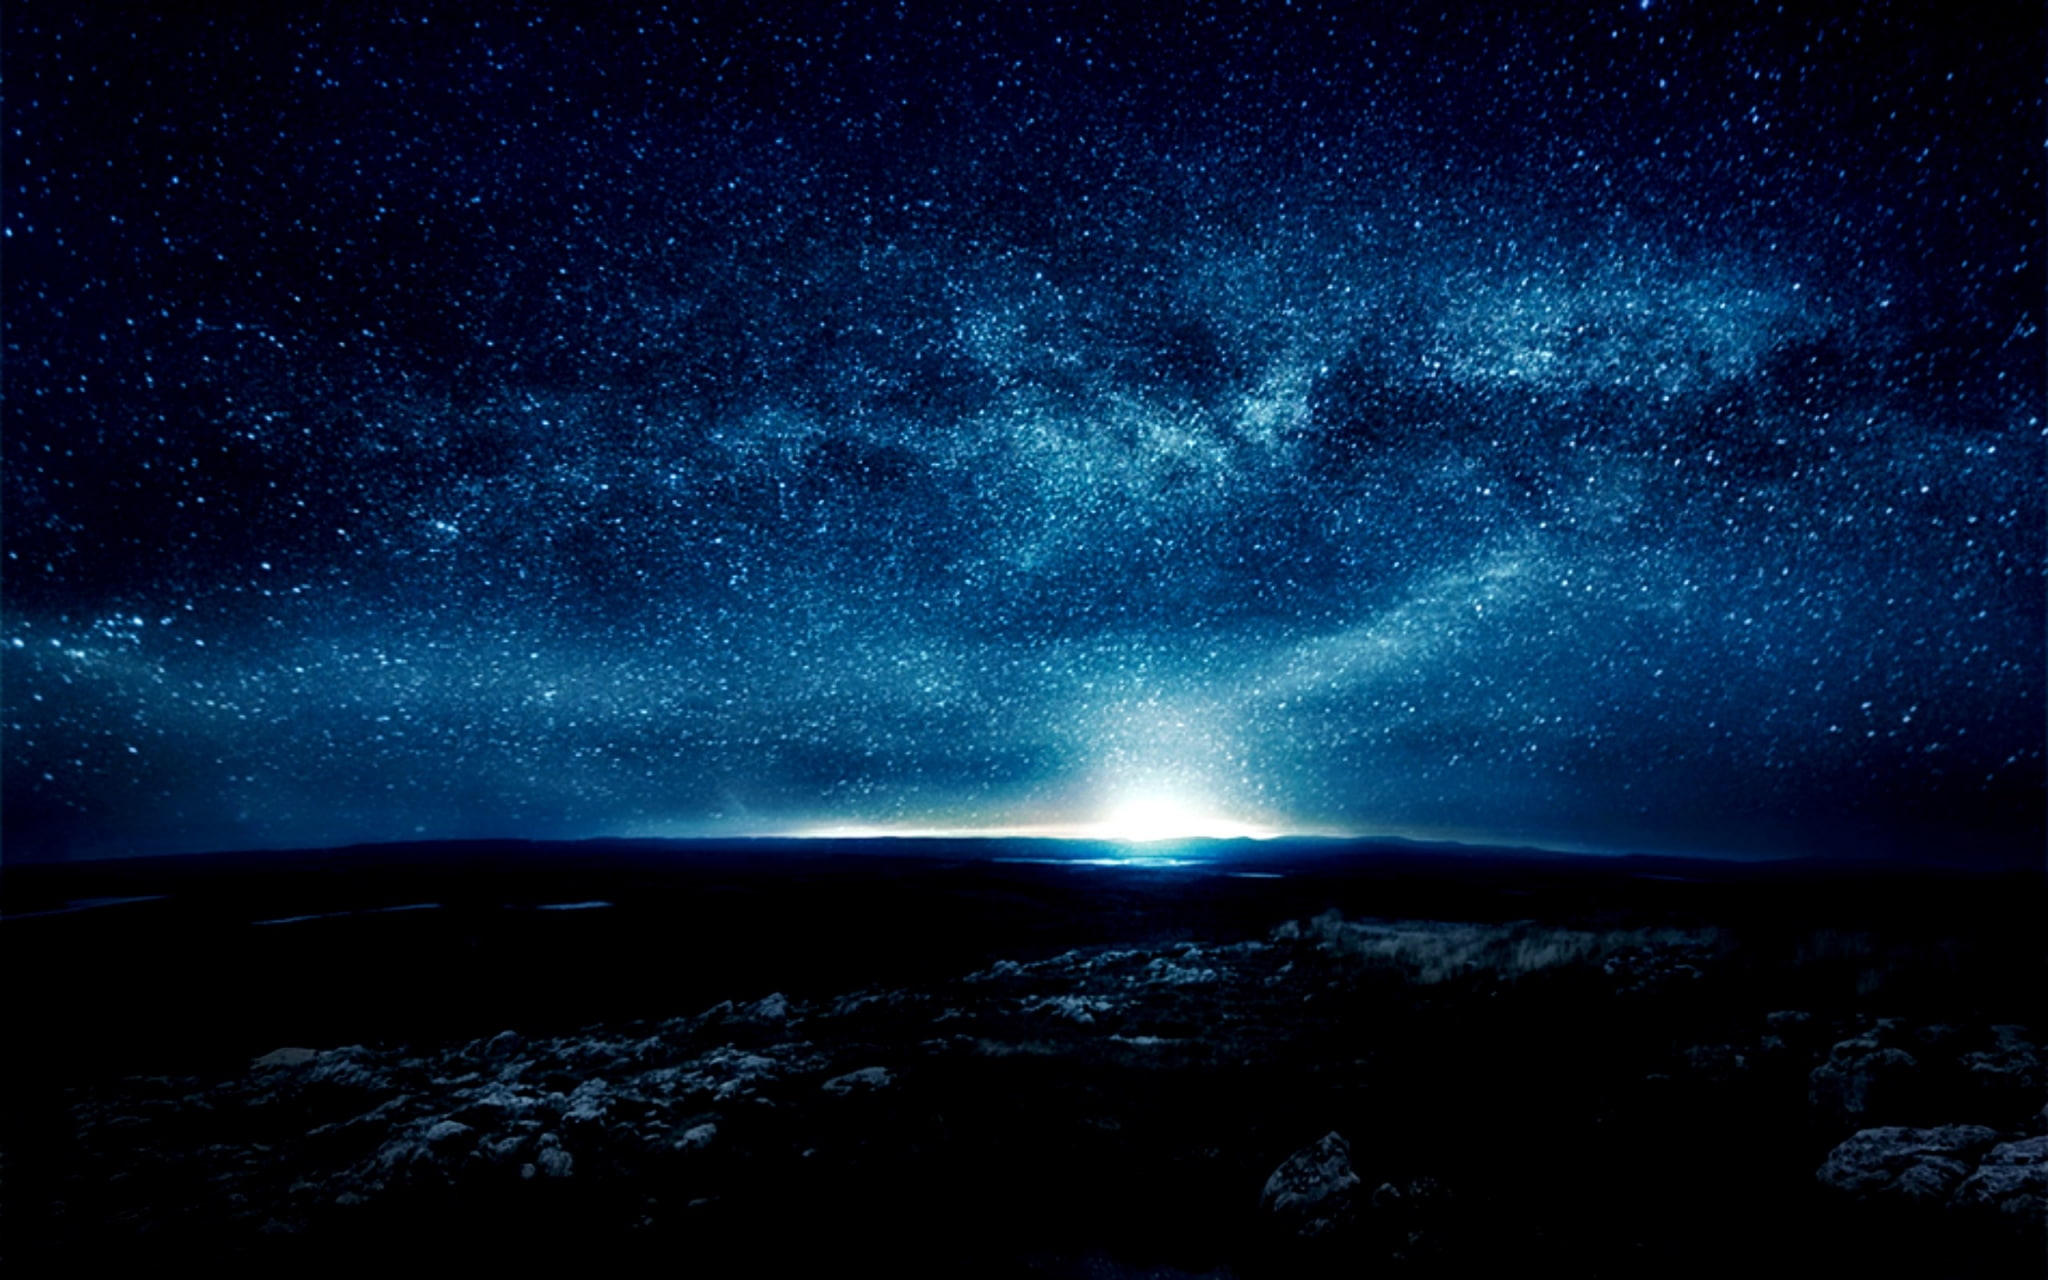 night sky screen backgrounds, star - space, galaxy, scenics - nature